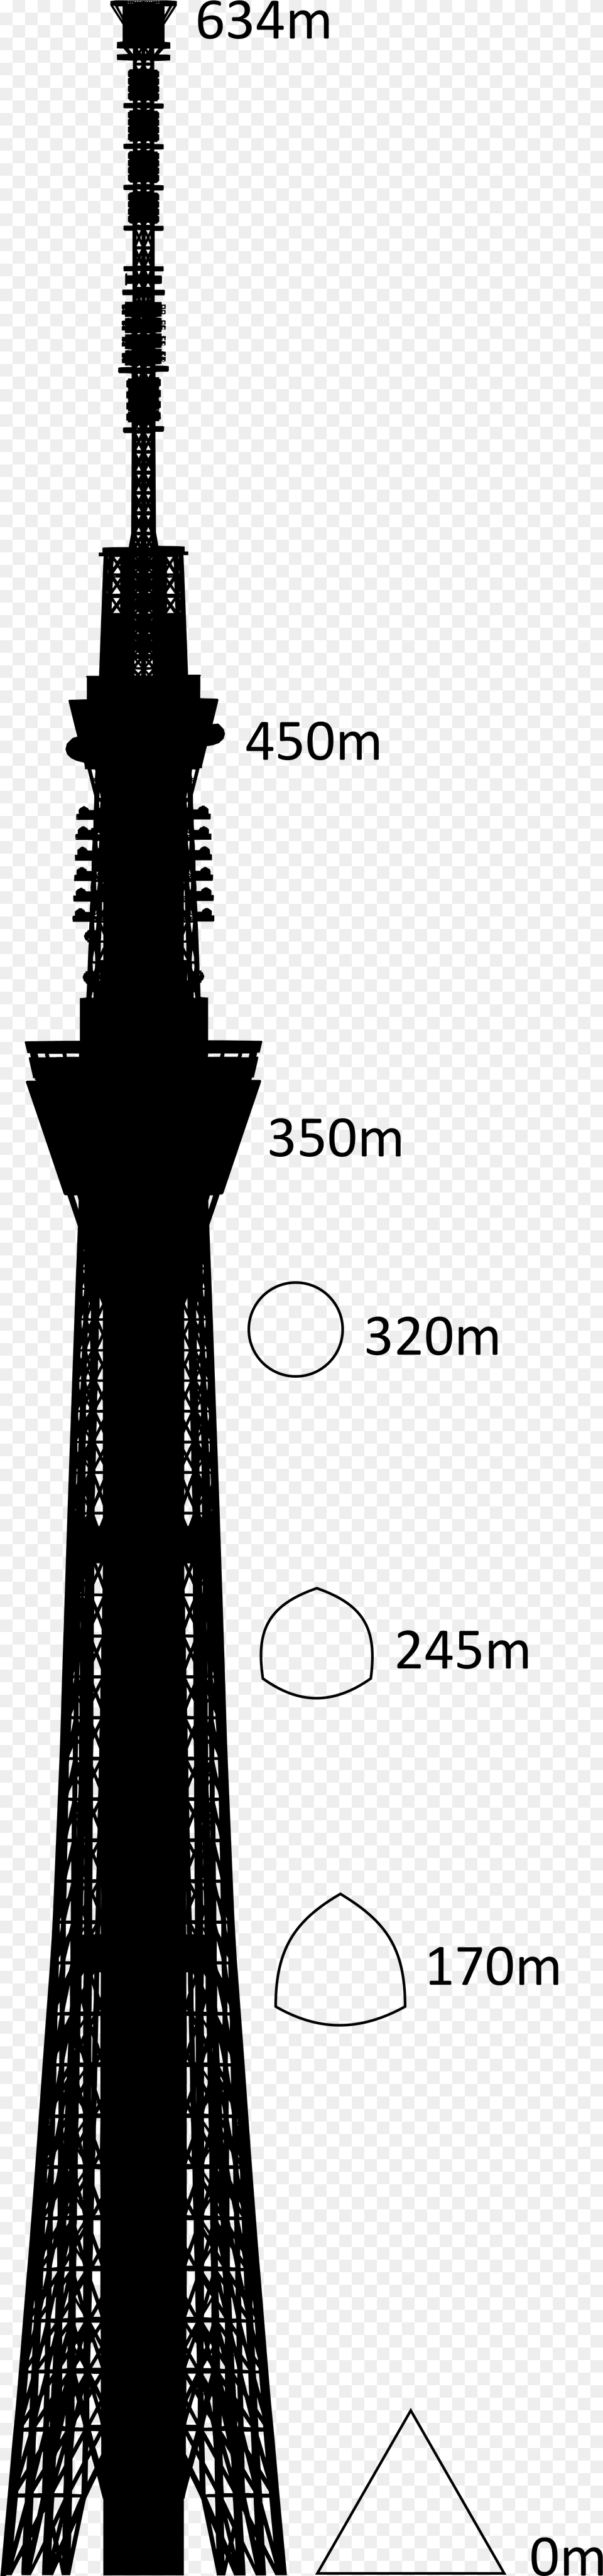 Tokyo Skytree Dimensions, Gray Free Transparent Png